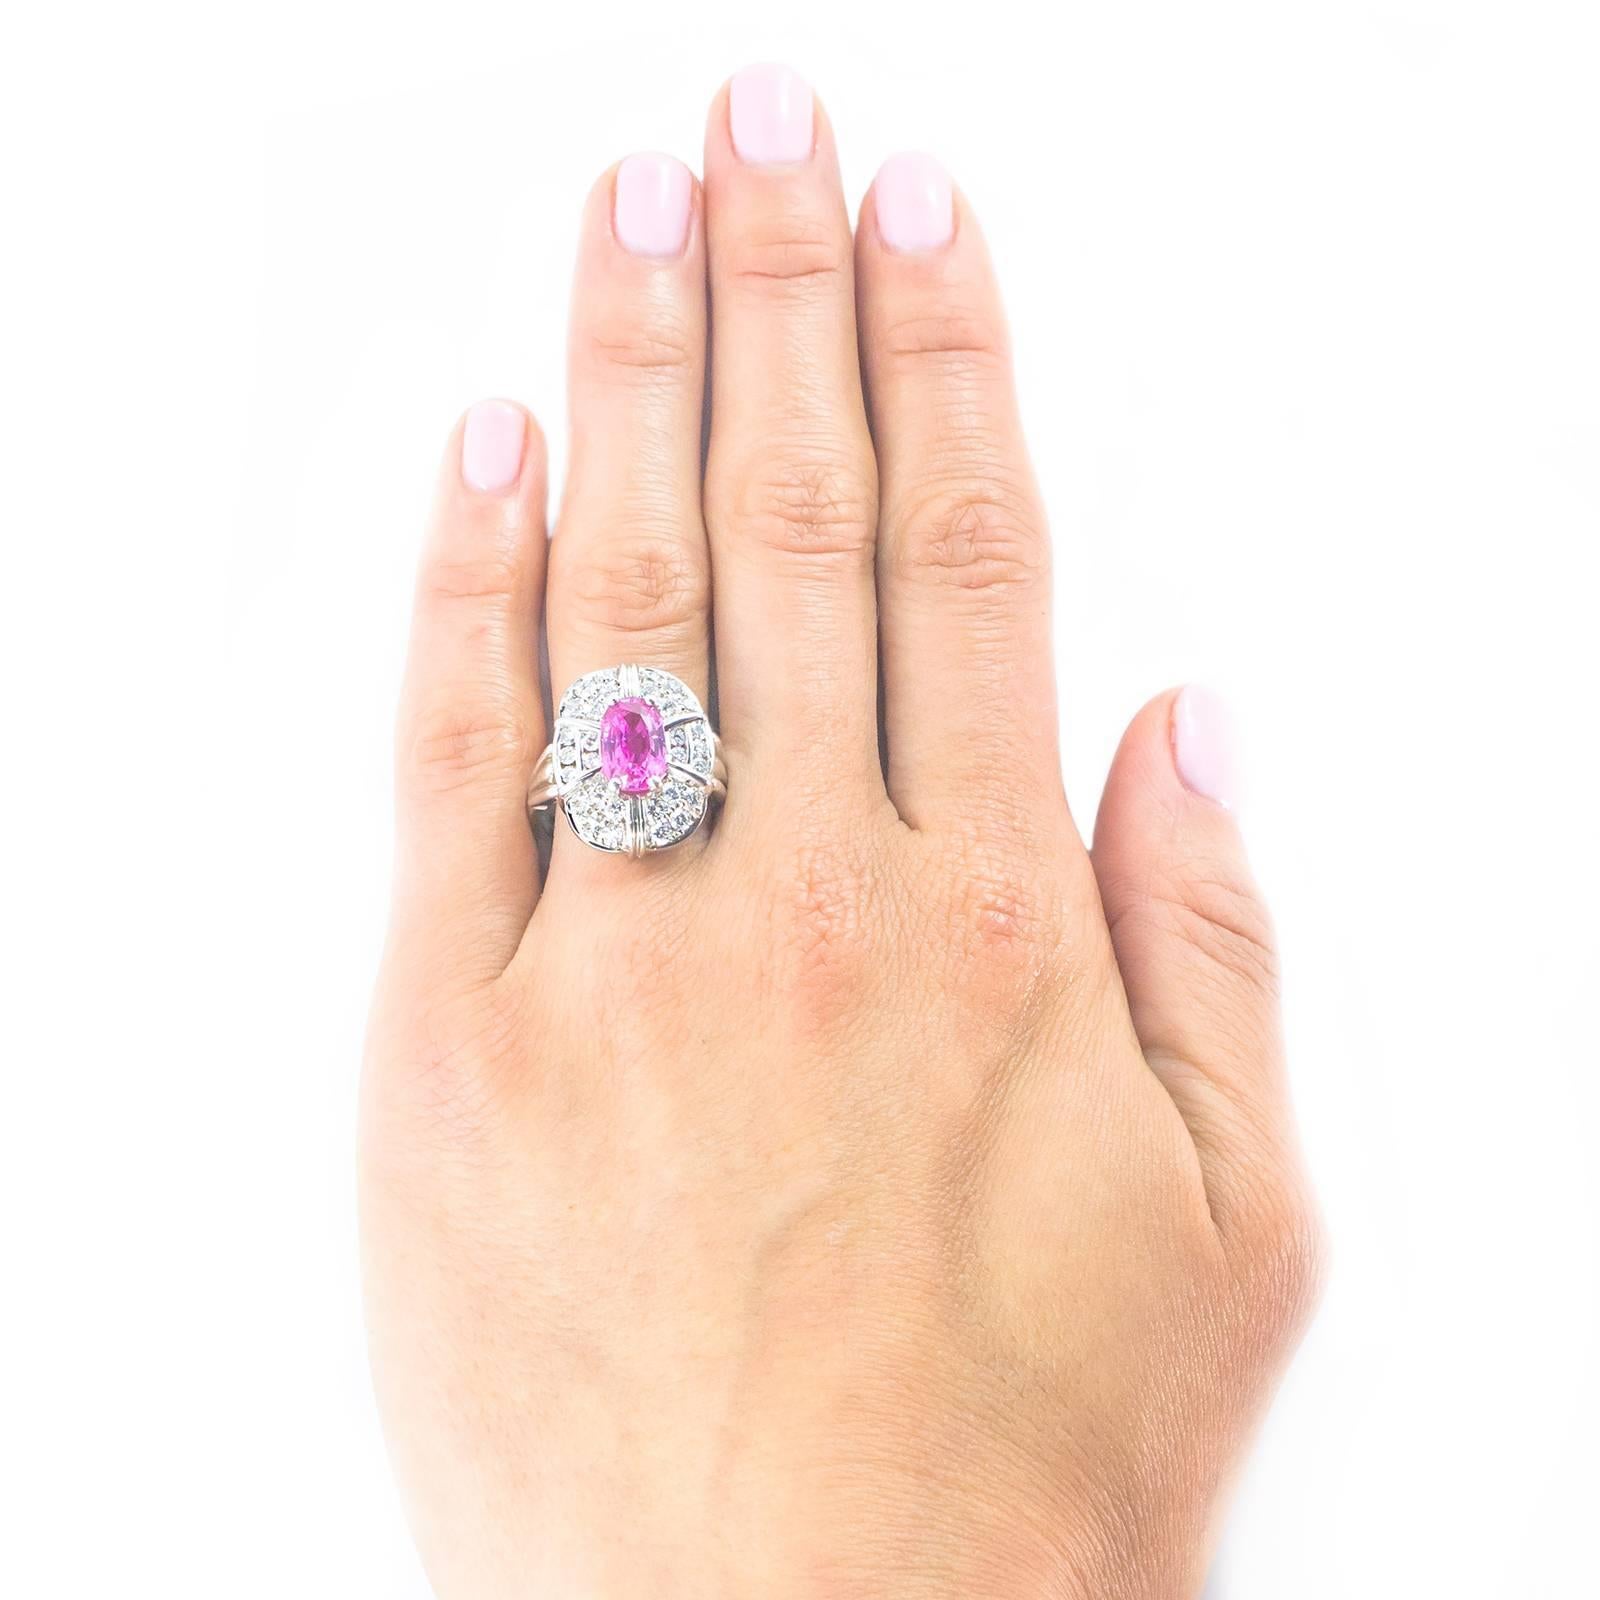 In this splendid Pink Sapphire Diamond White Gold Ring, a stunning Pink Sapphire is set within a surround of 30 White Diamonds in this refined, elegant 14K white gold mount.

The ring is very finger flattering sitting 15mm north to south covering